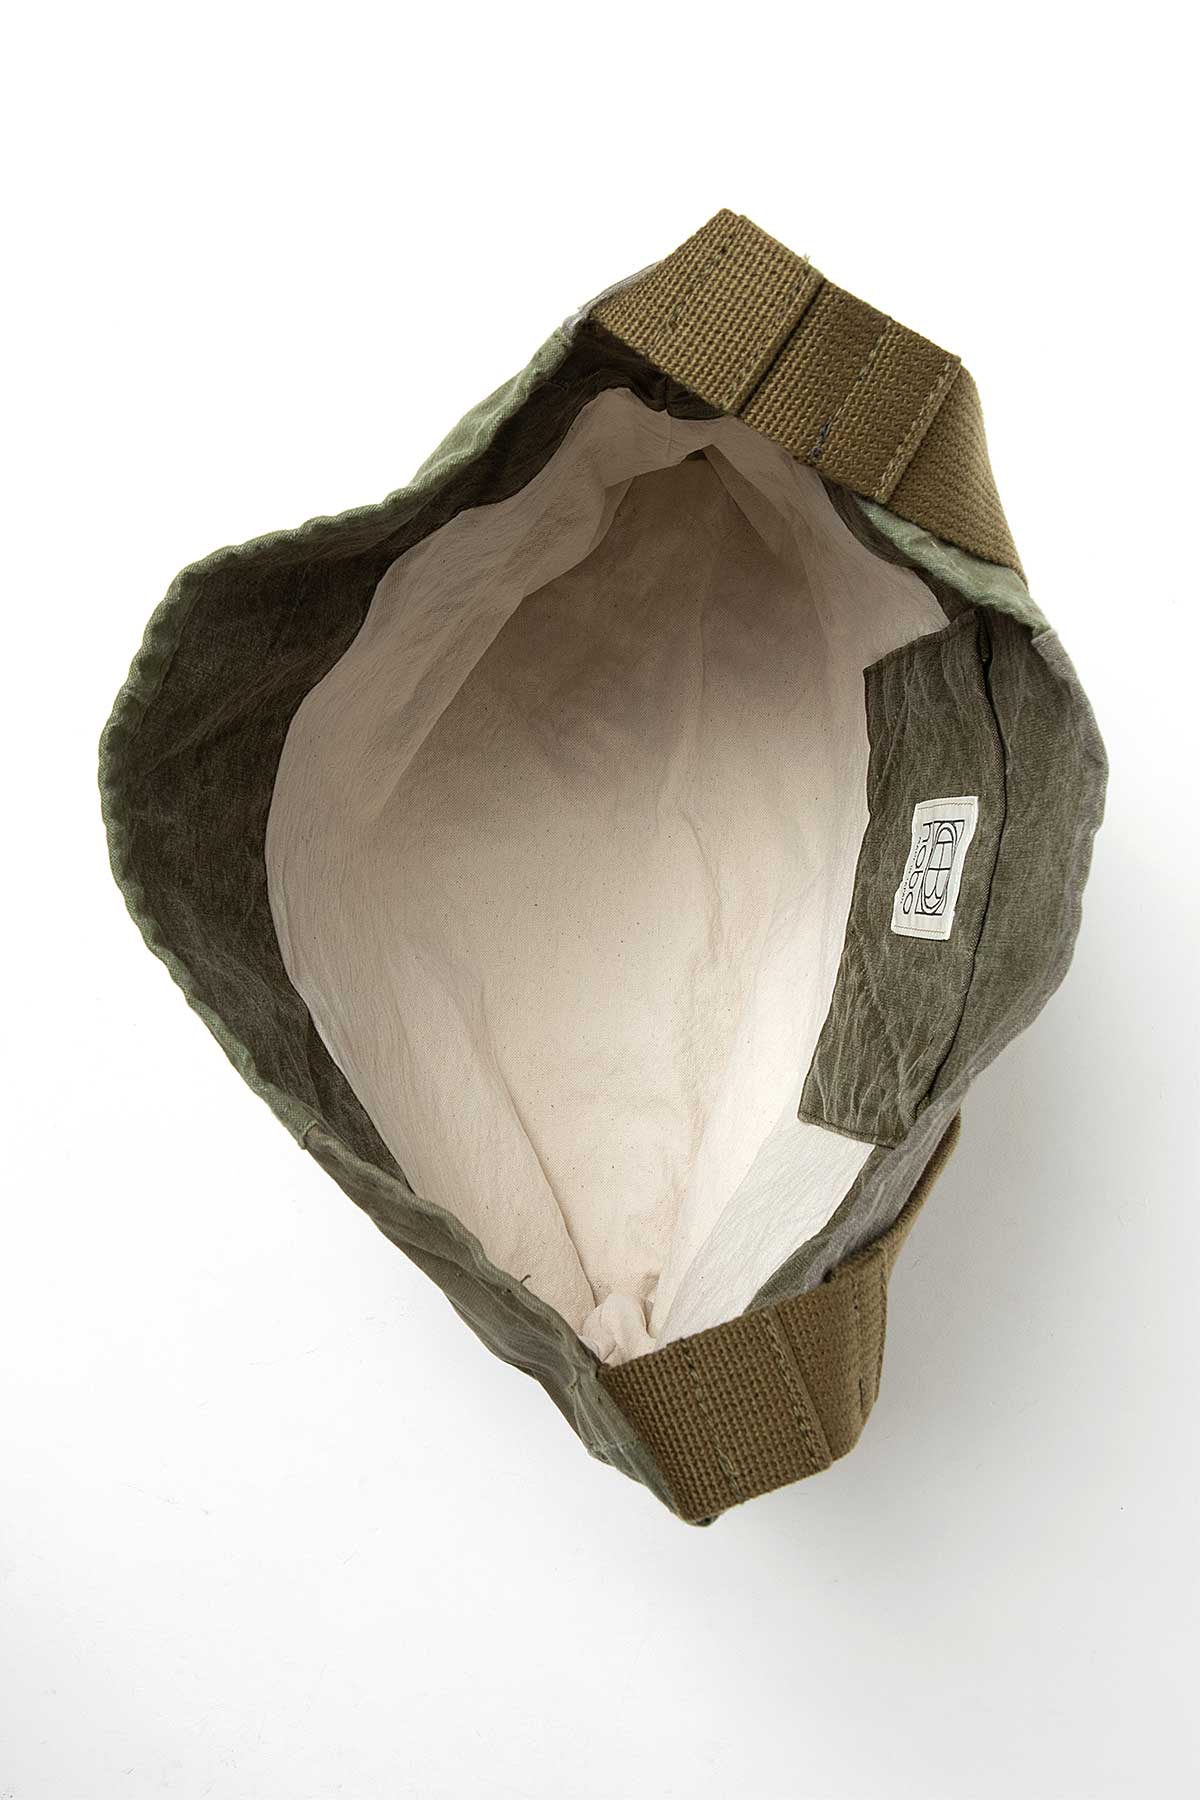 HOBO / DELIVERY BAG UPCYCLED US ARMY CLOTH (Olive)内部